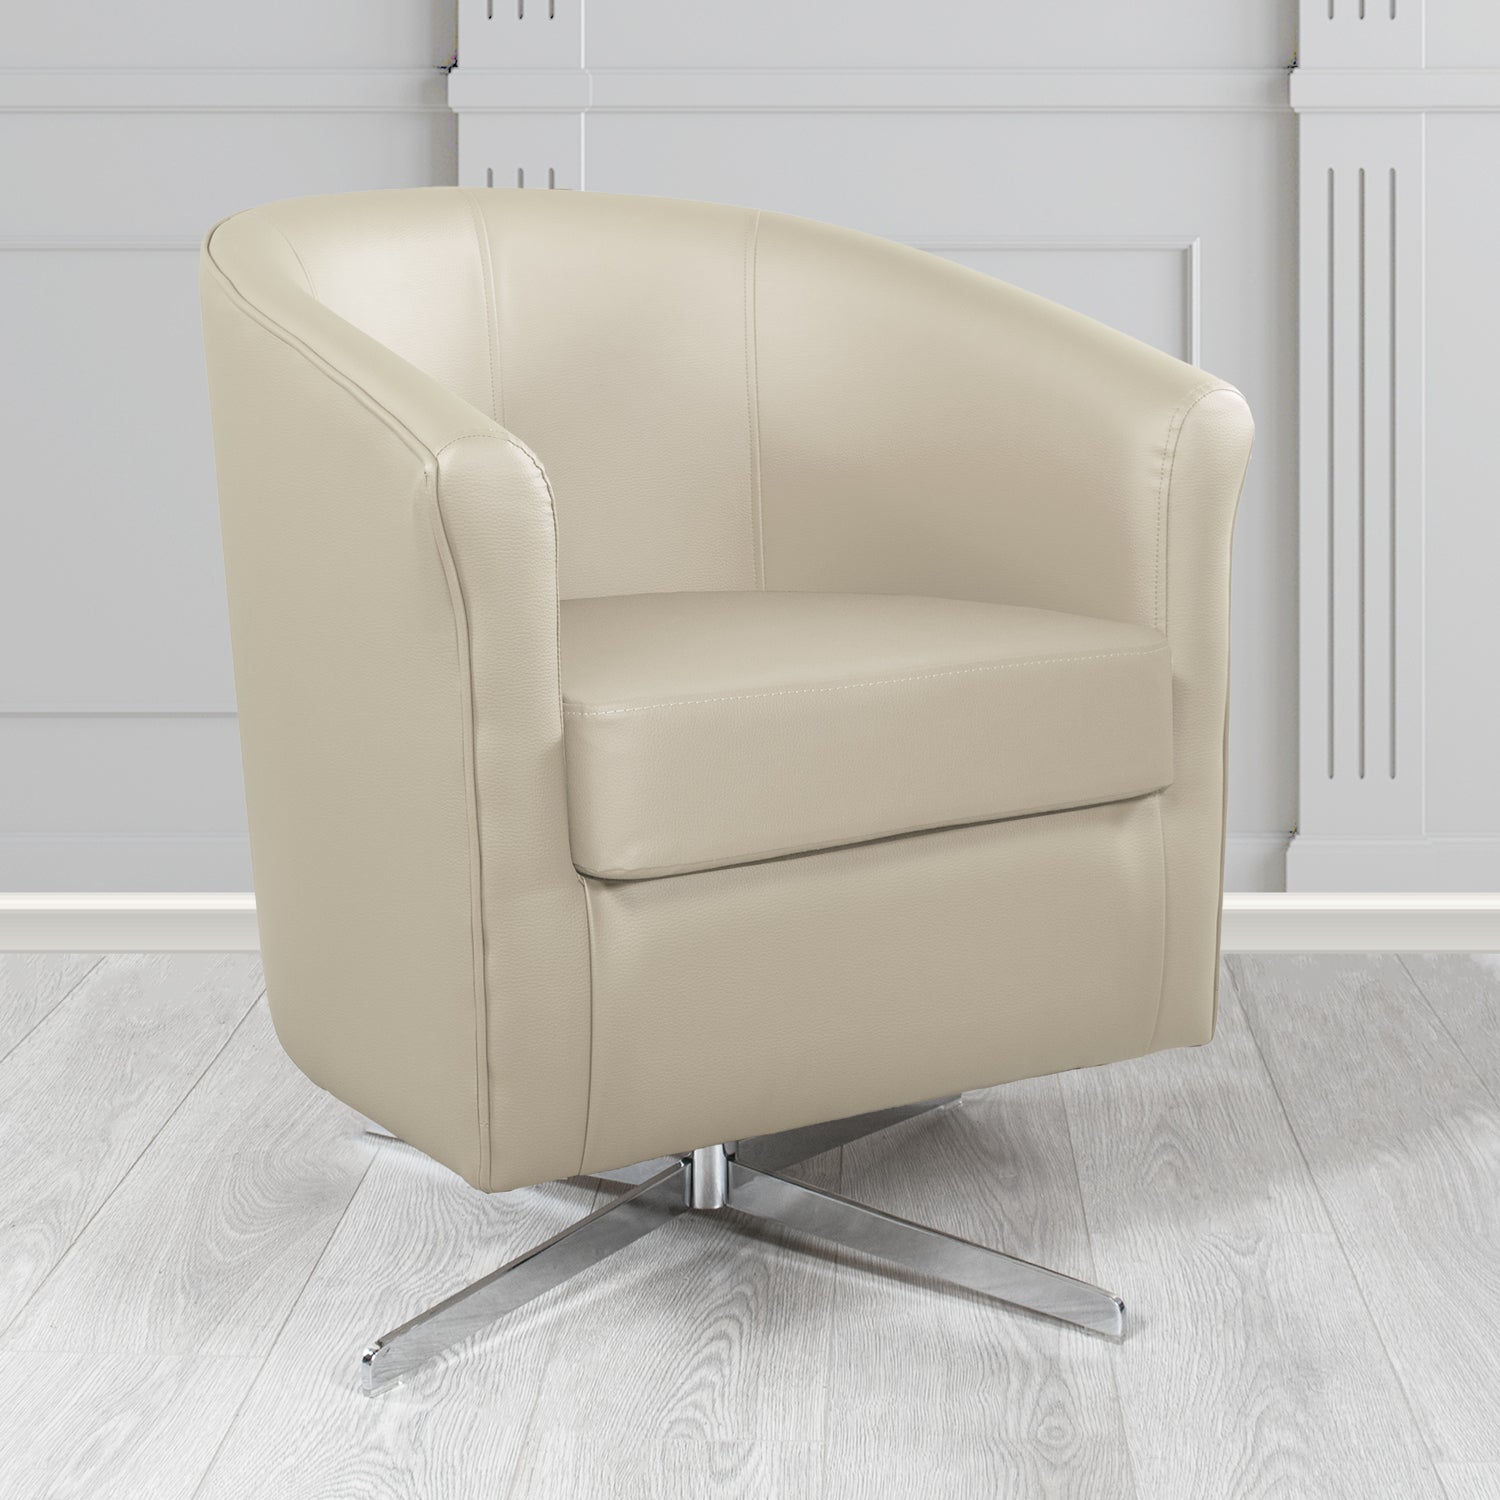 Cannes Swivel Tub Chair in Just Colour Dune Crib 5 Faux Leather - The Tub Chair Shop